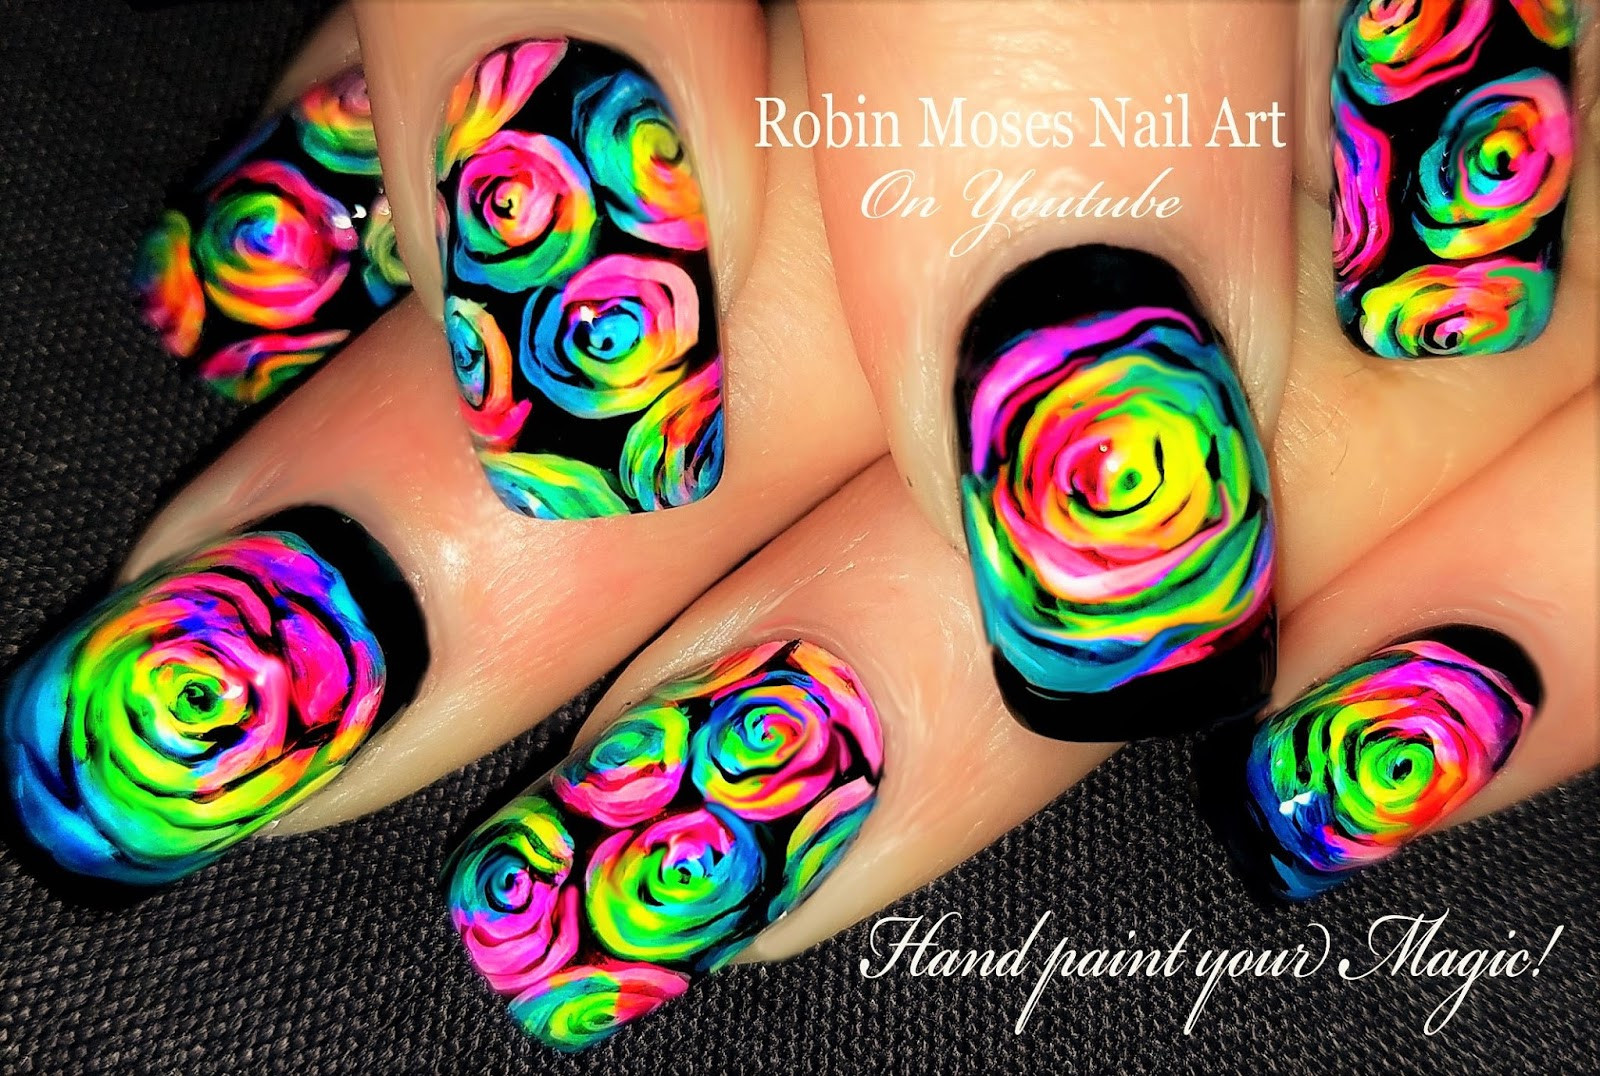 robin moses nail art brushes for sale